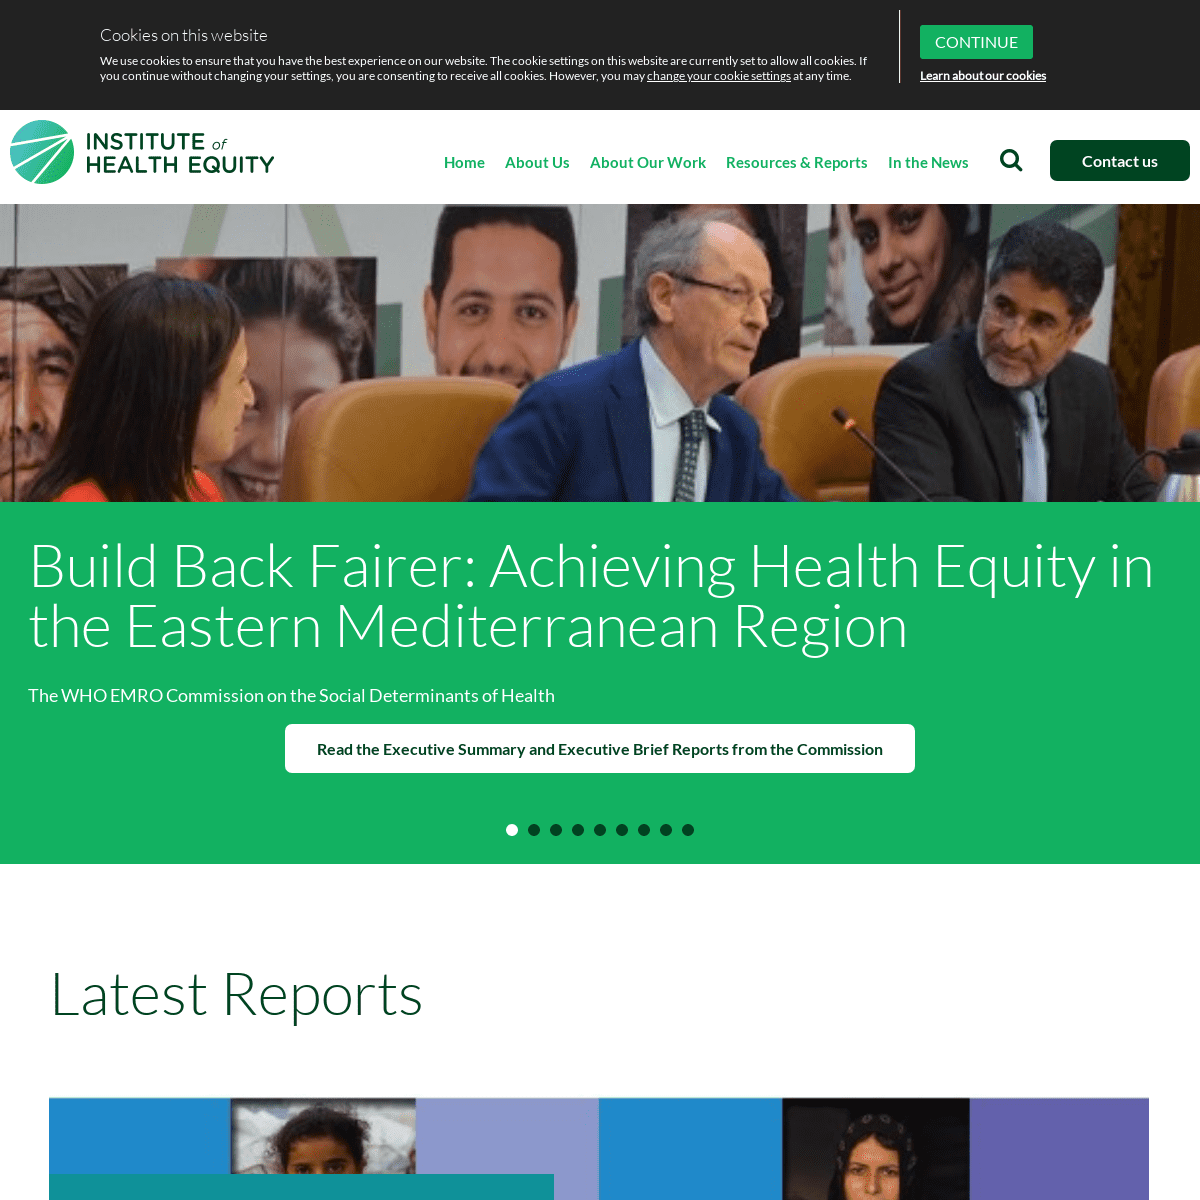 A complete backup of https://instituteofhealthequity.org